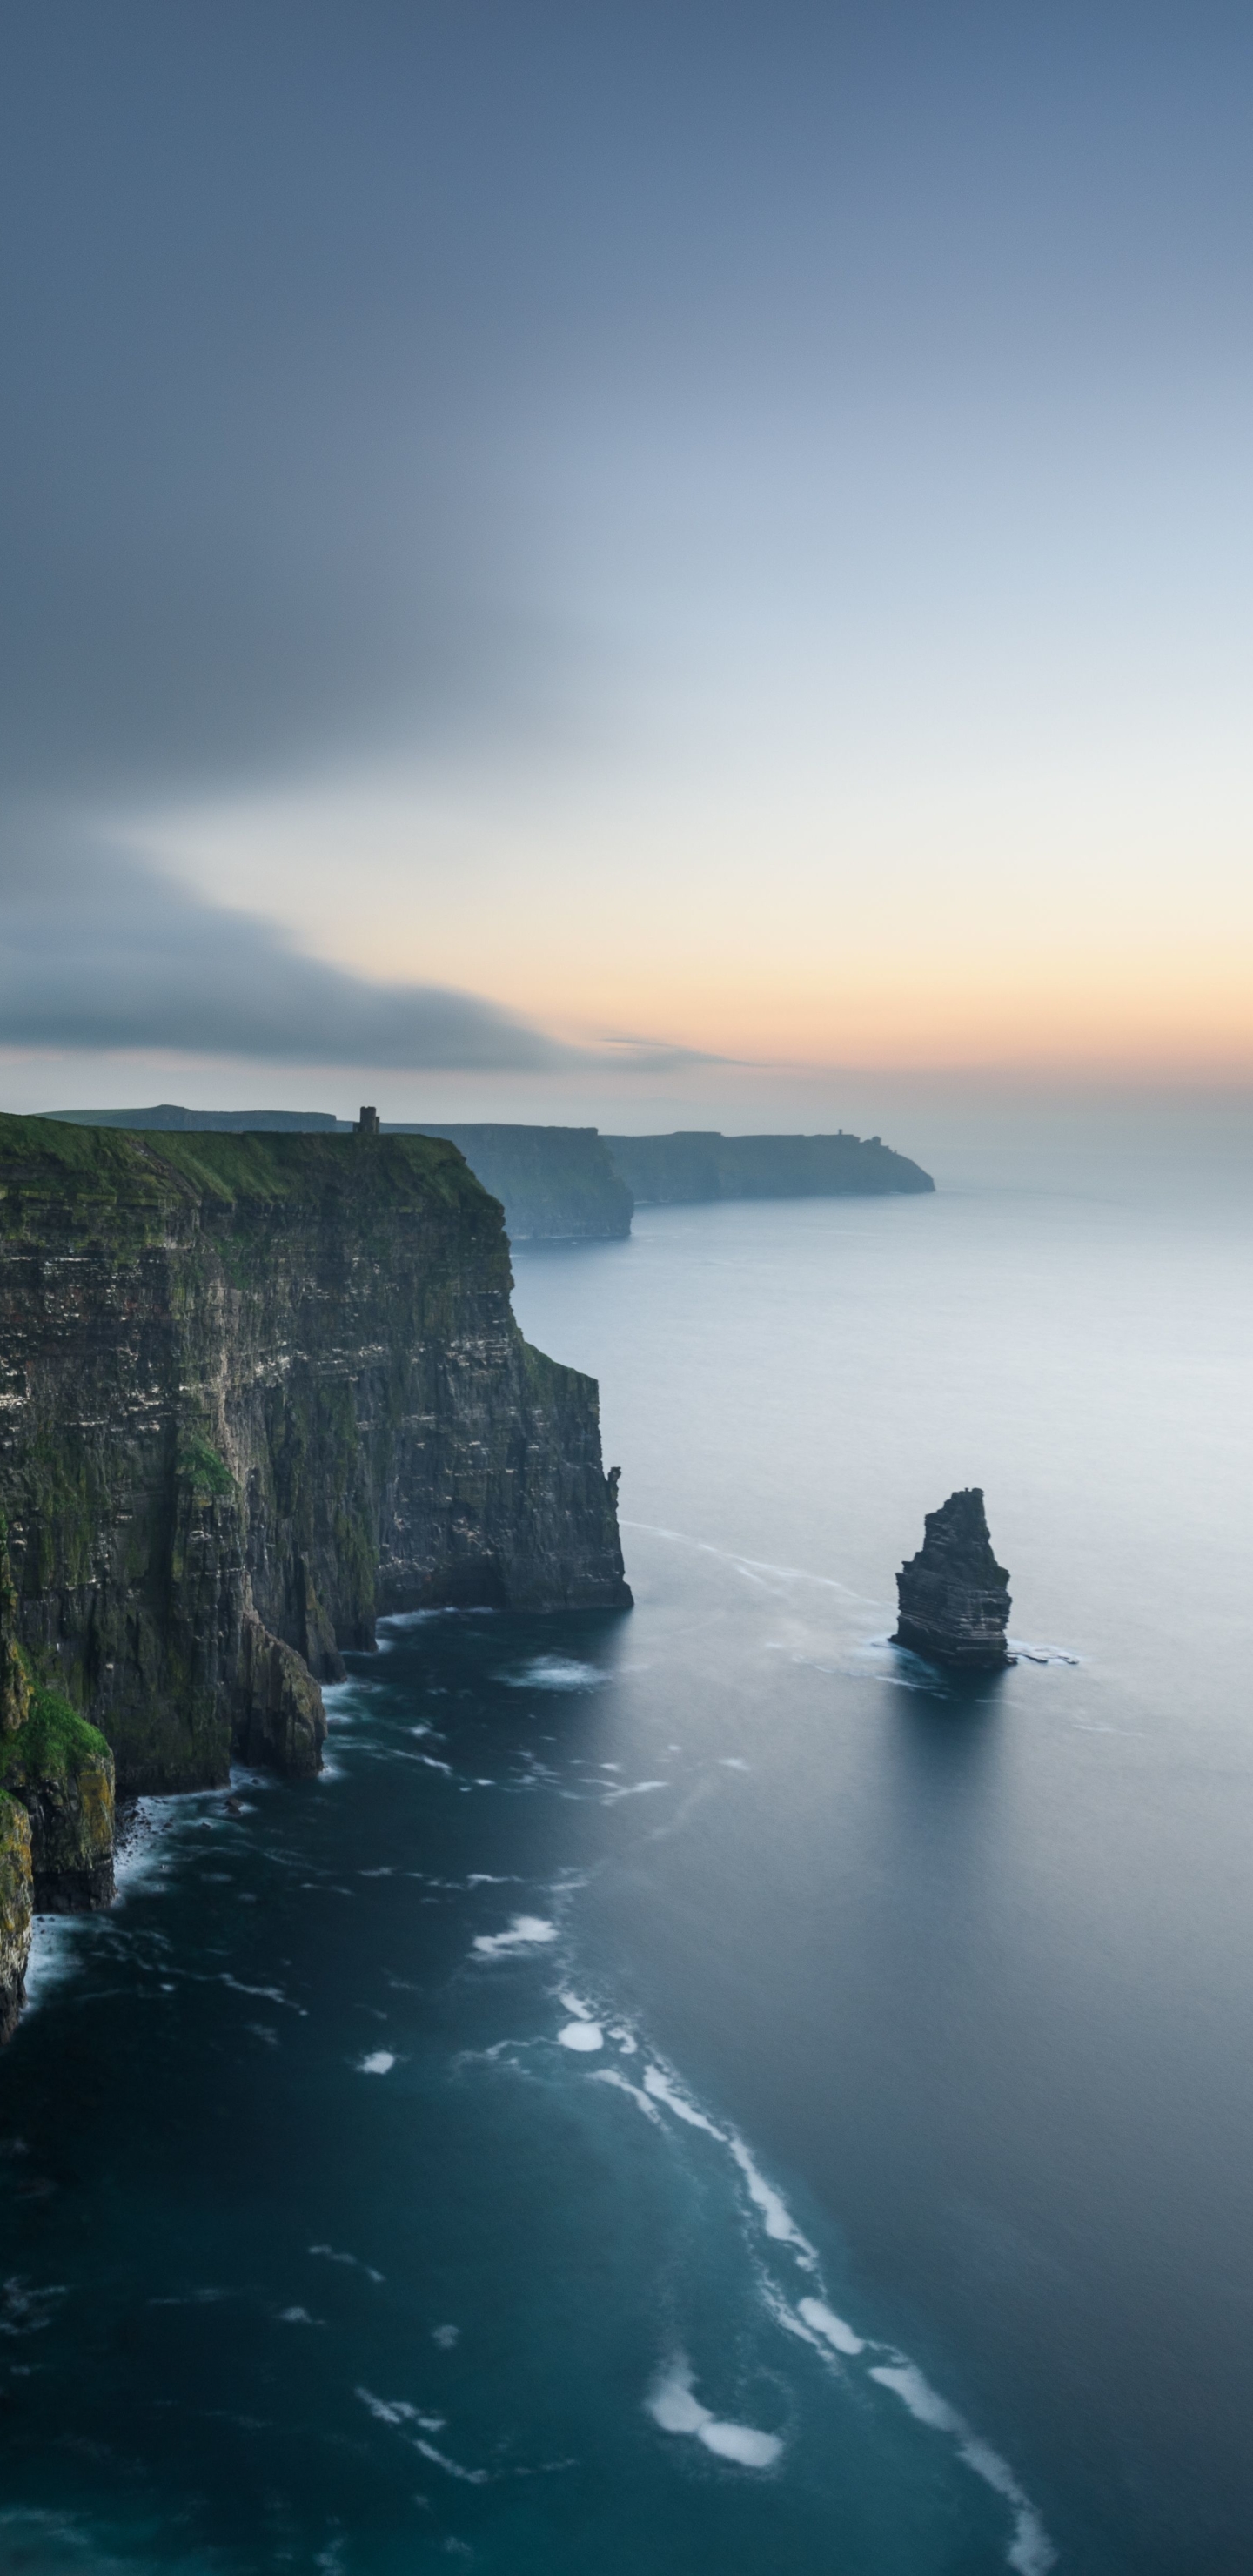 500 Beautiful Ireland Pictures  Download Free Images on Unsplash